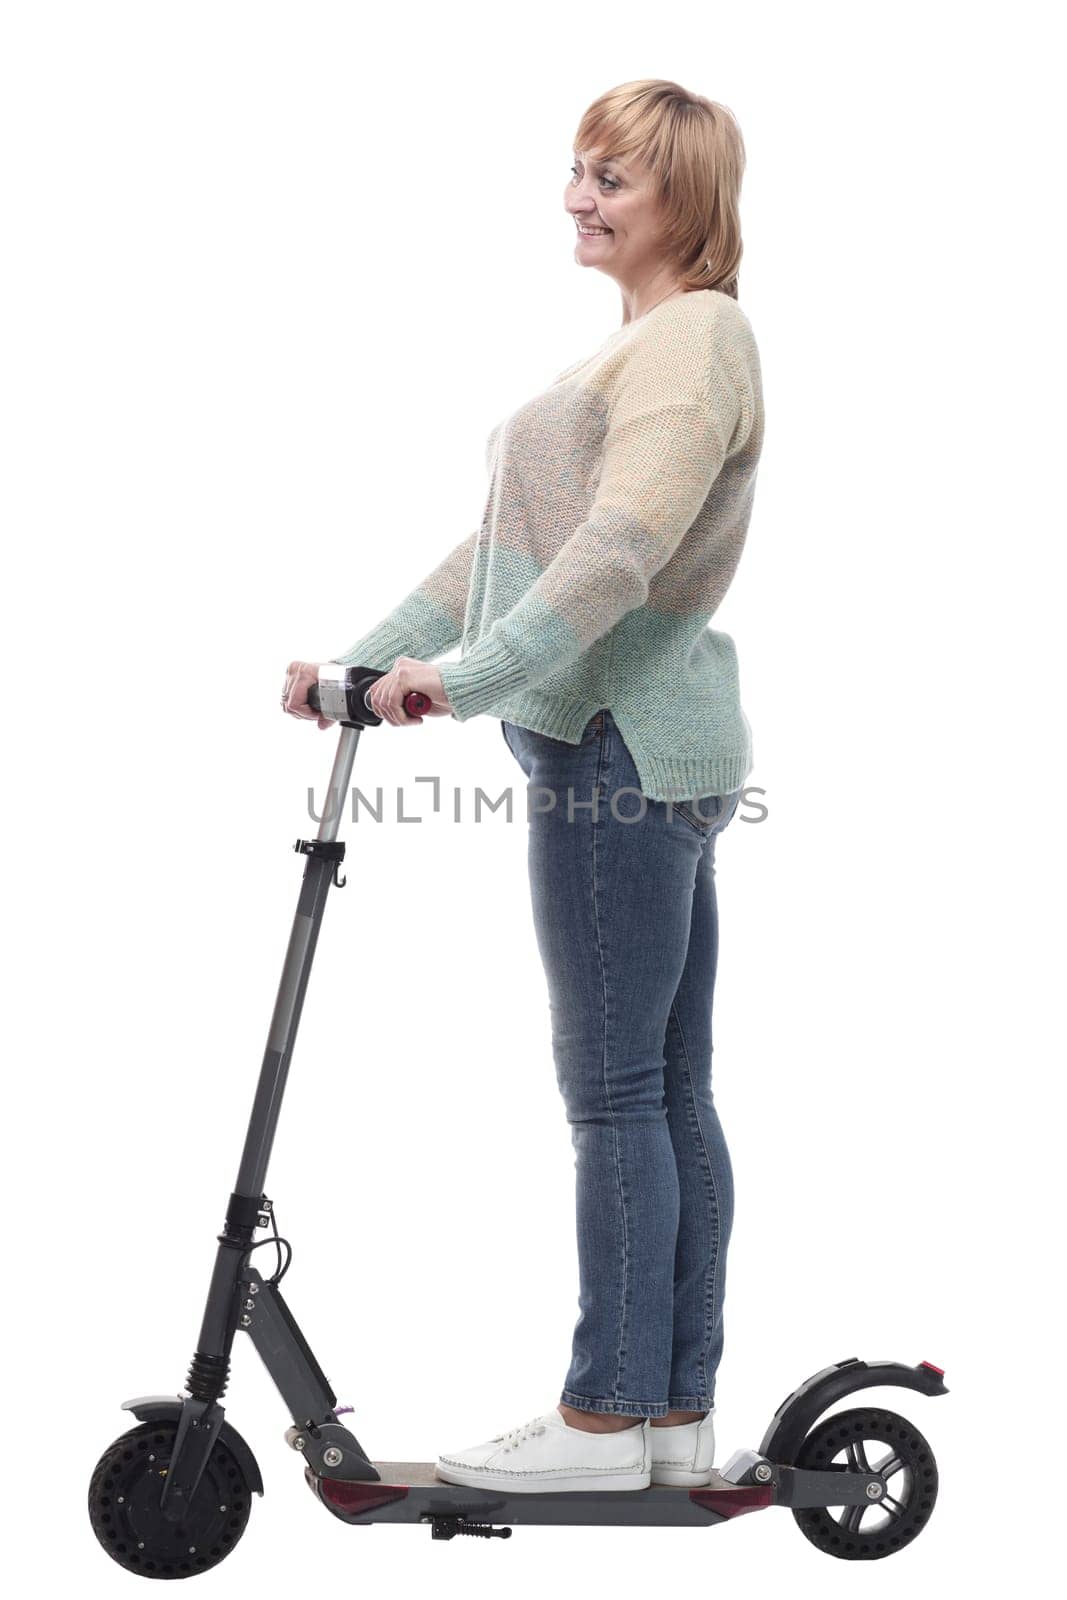 in full growth. attractive casual woman with electric scooter. isolated on a white background.